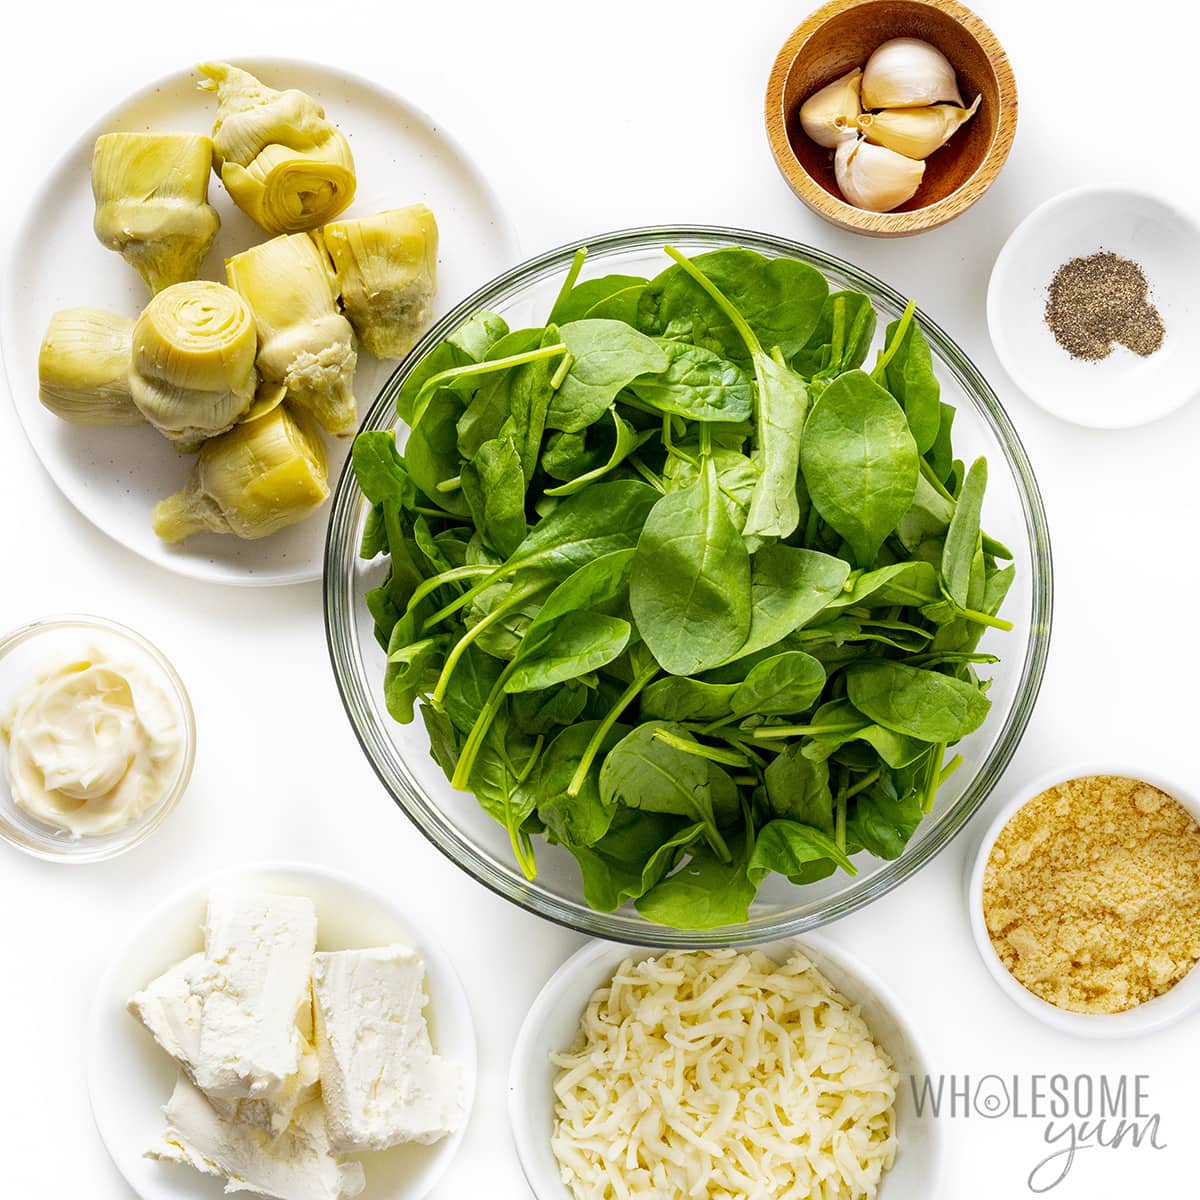 Ingredients for spinach artichoke dip in bowls.